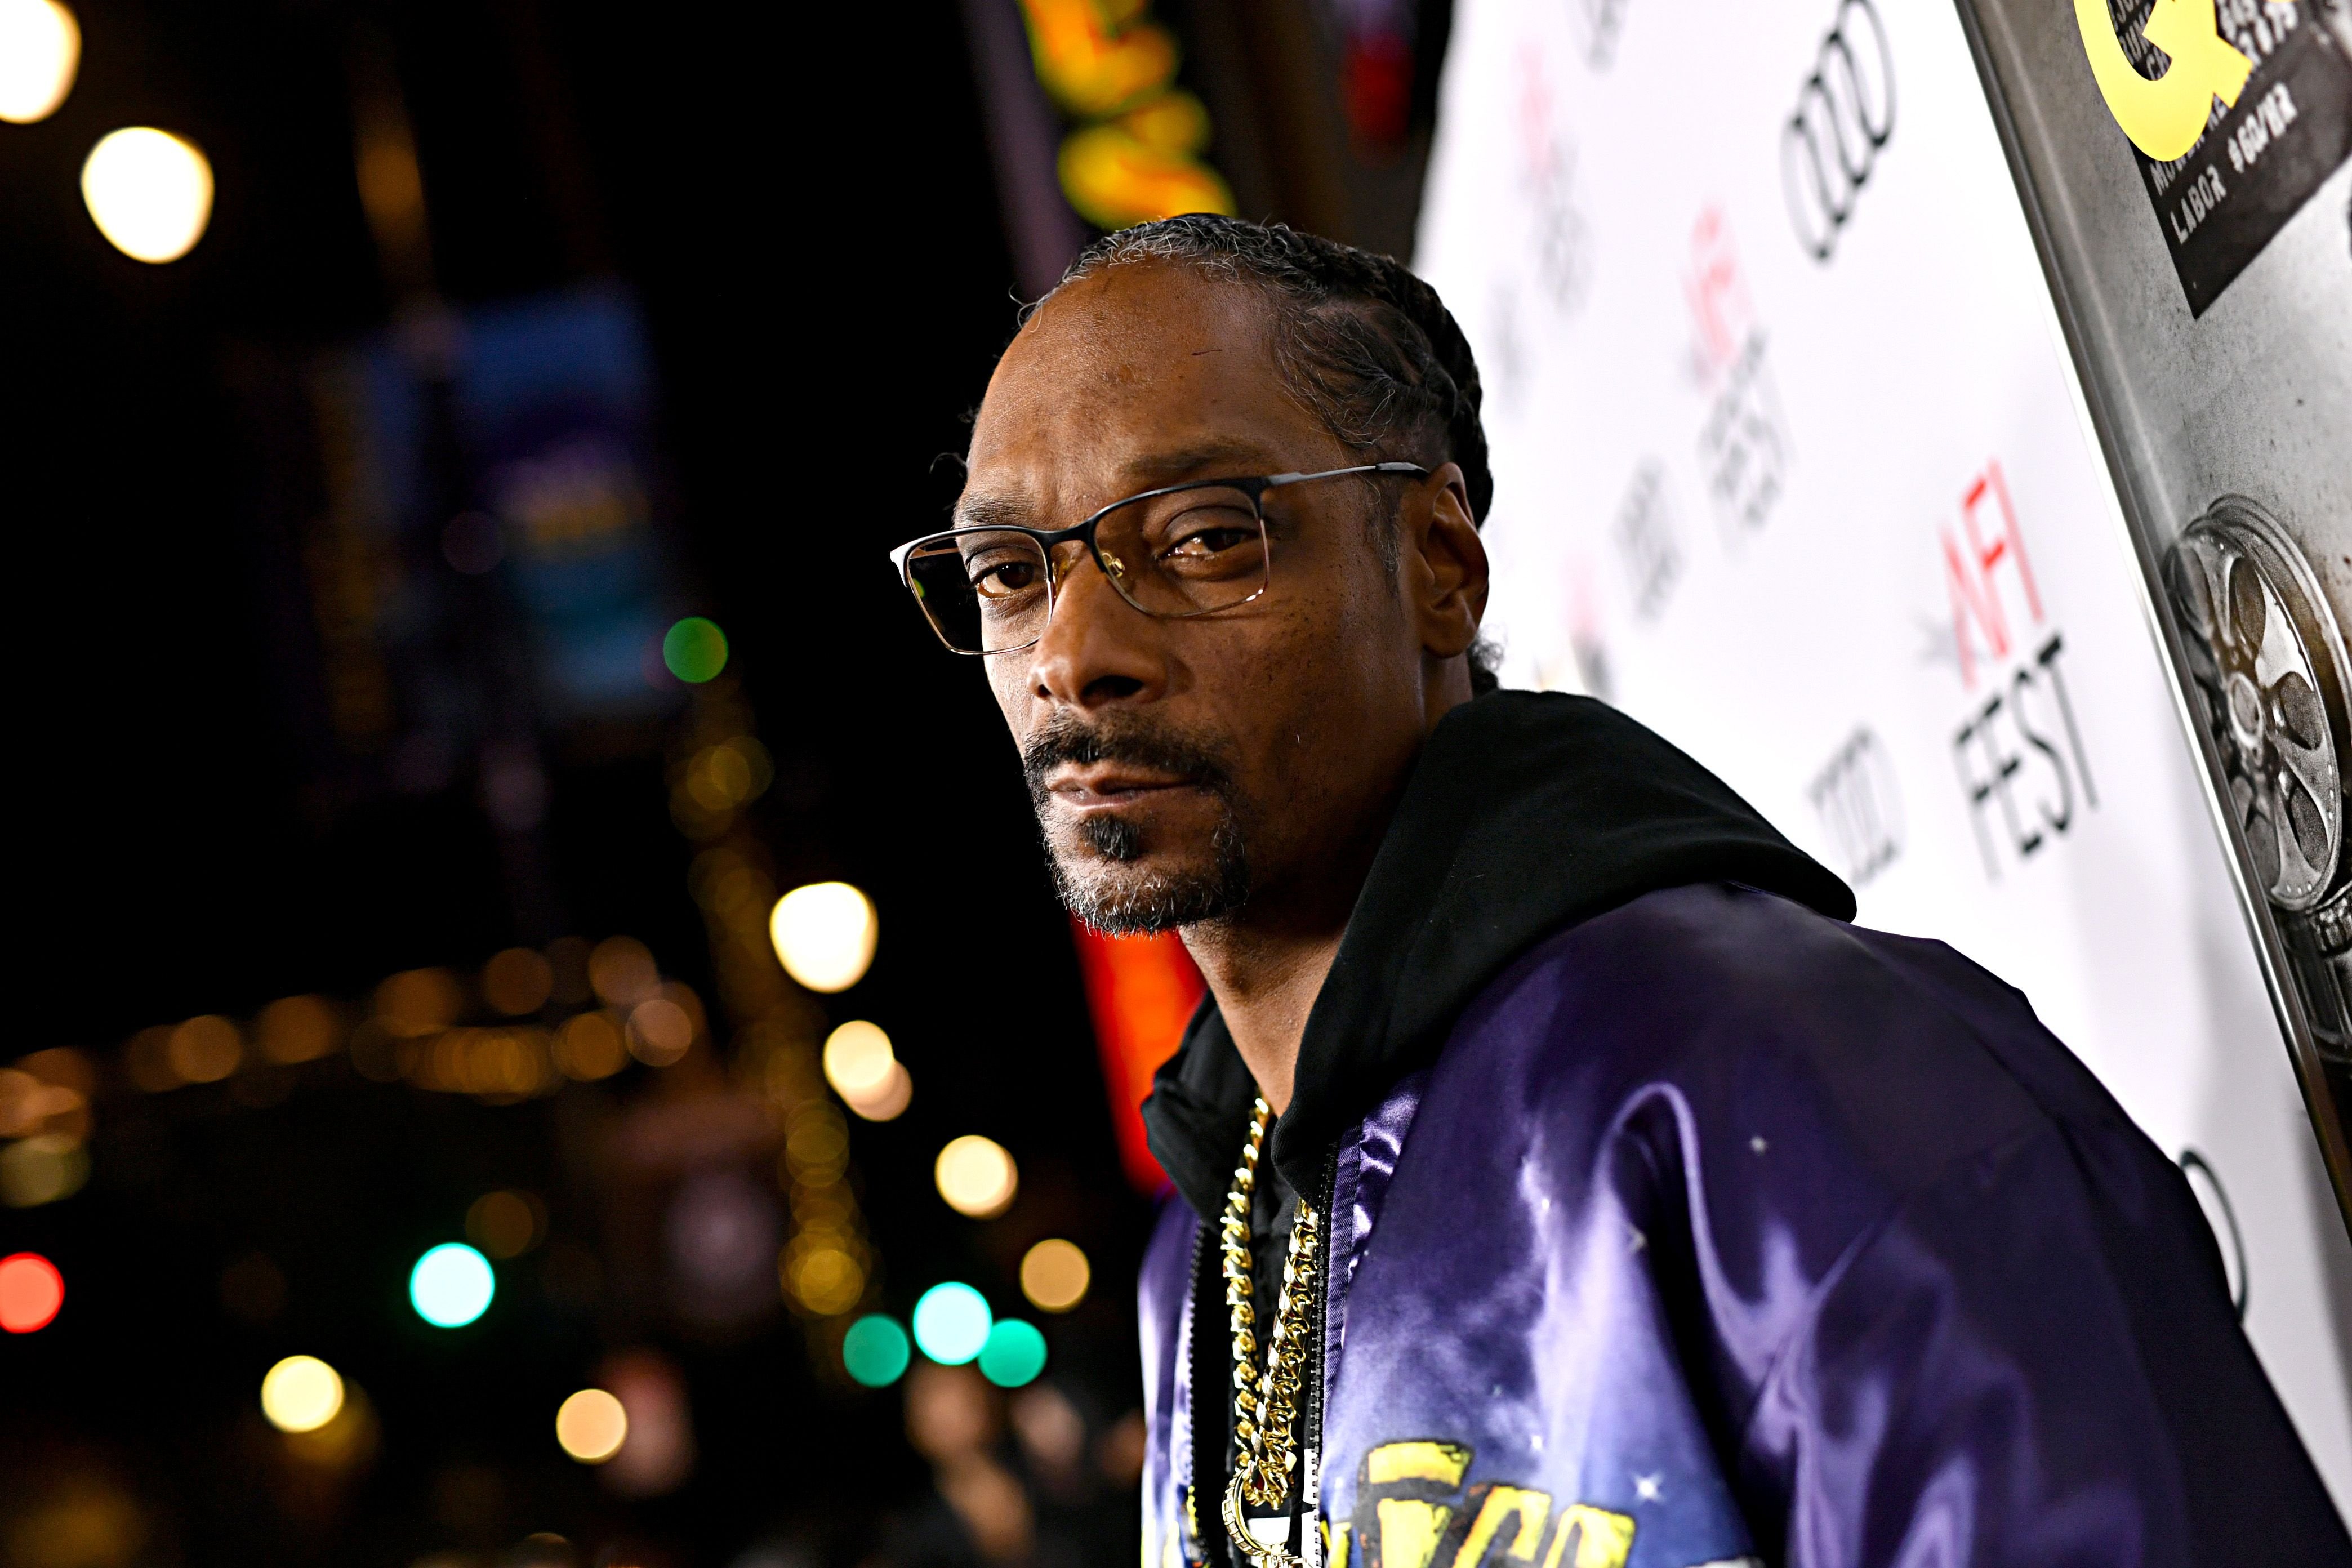 Rapper Snoop Dogg at the "Queen & Slim" premiere on November 14, 2019 in Hollywood. | Photo: Getty Images